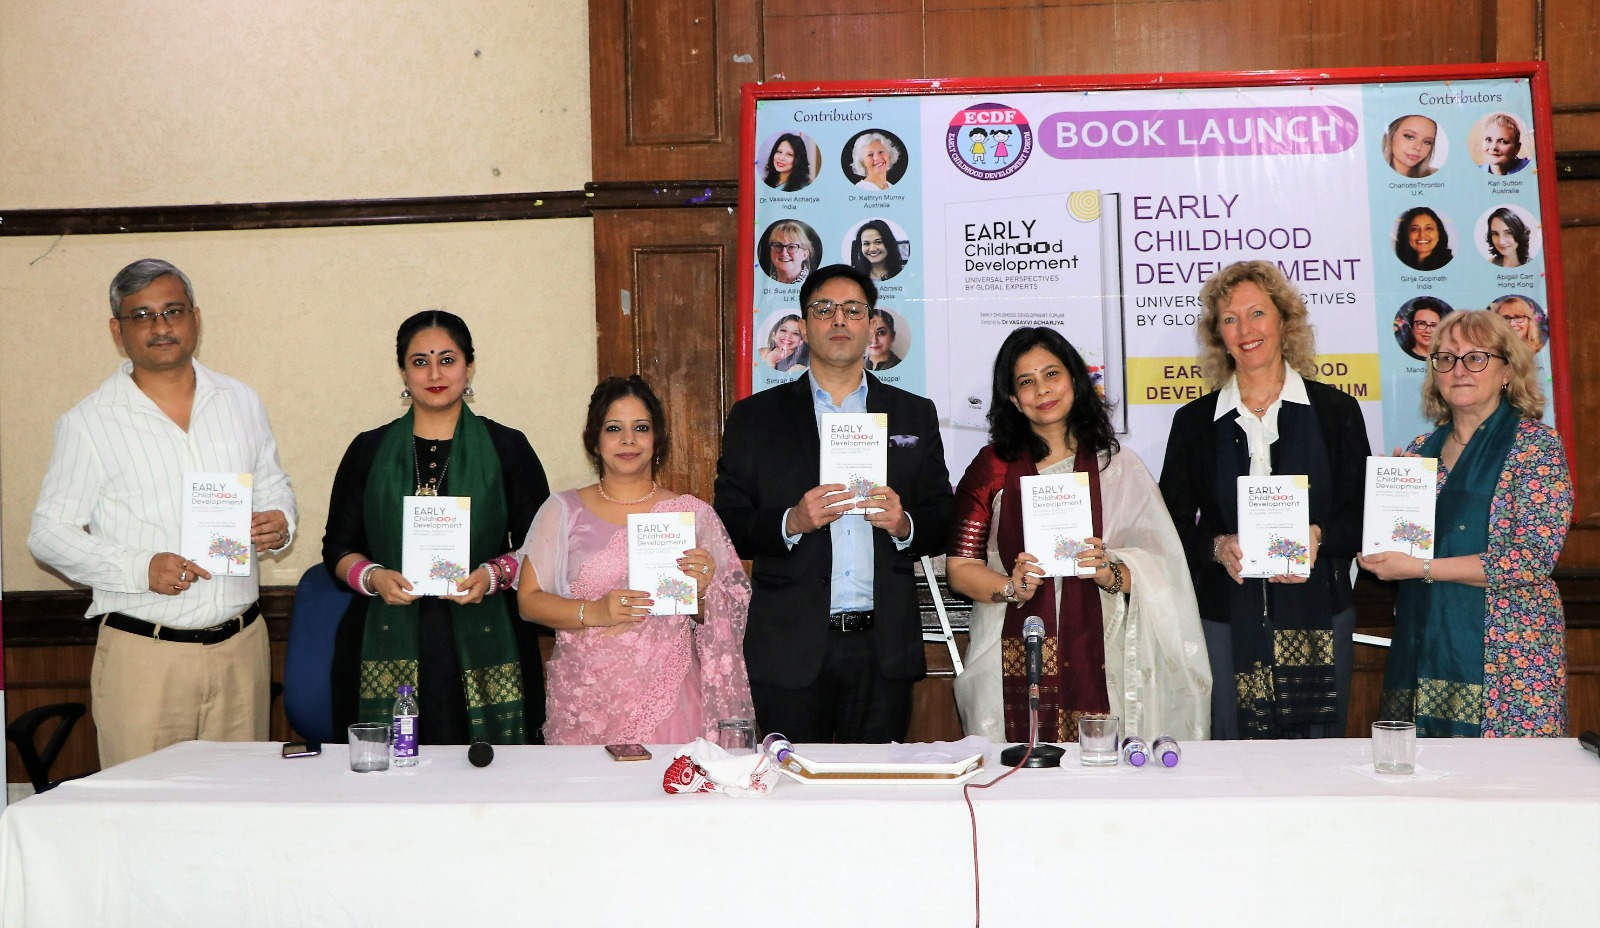 ECDF LAUNCHES BOOK ON EARLY CHILDHOOD DEVELOPMENT